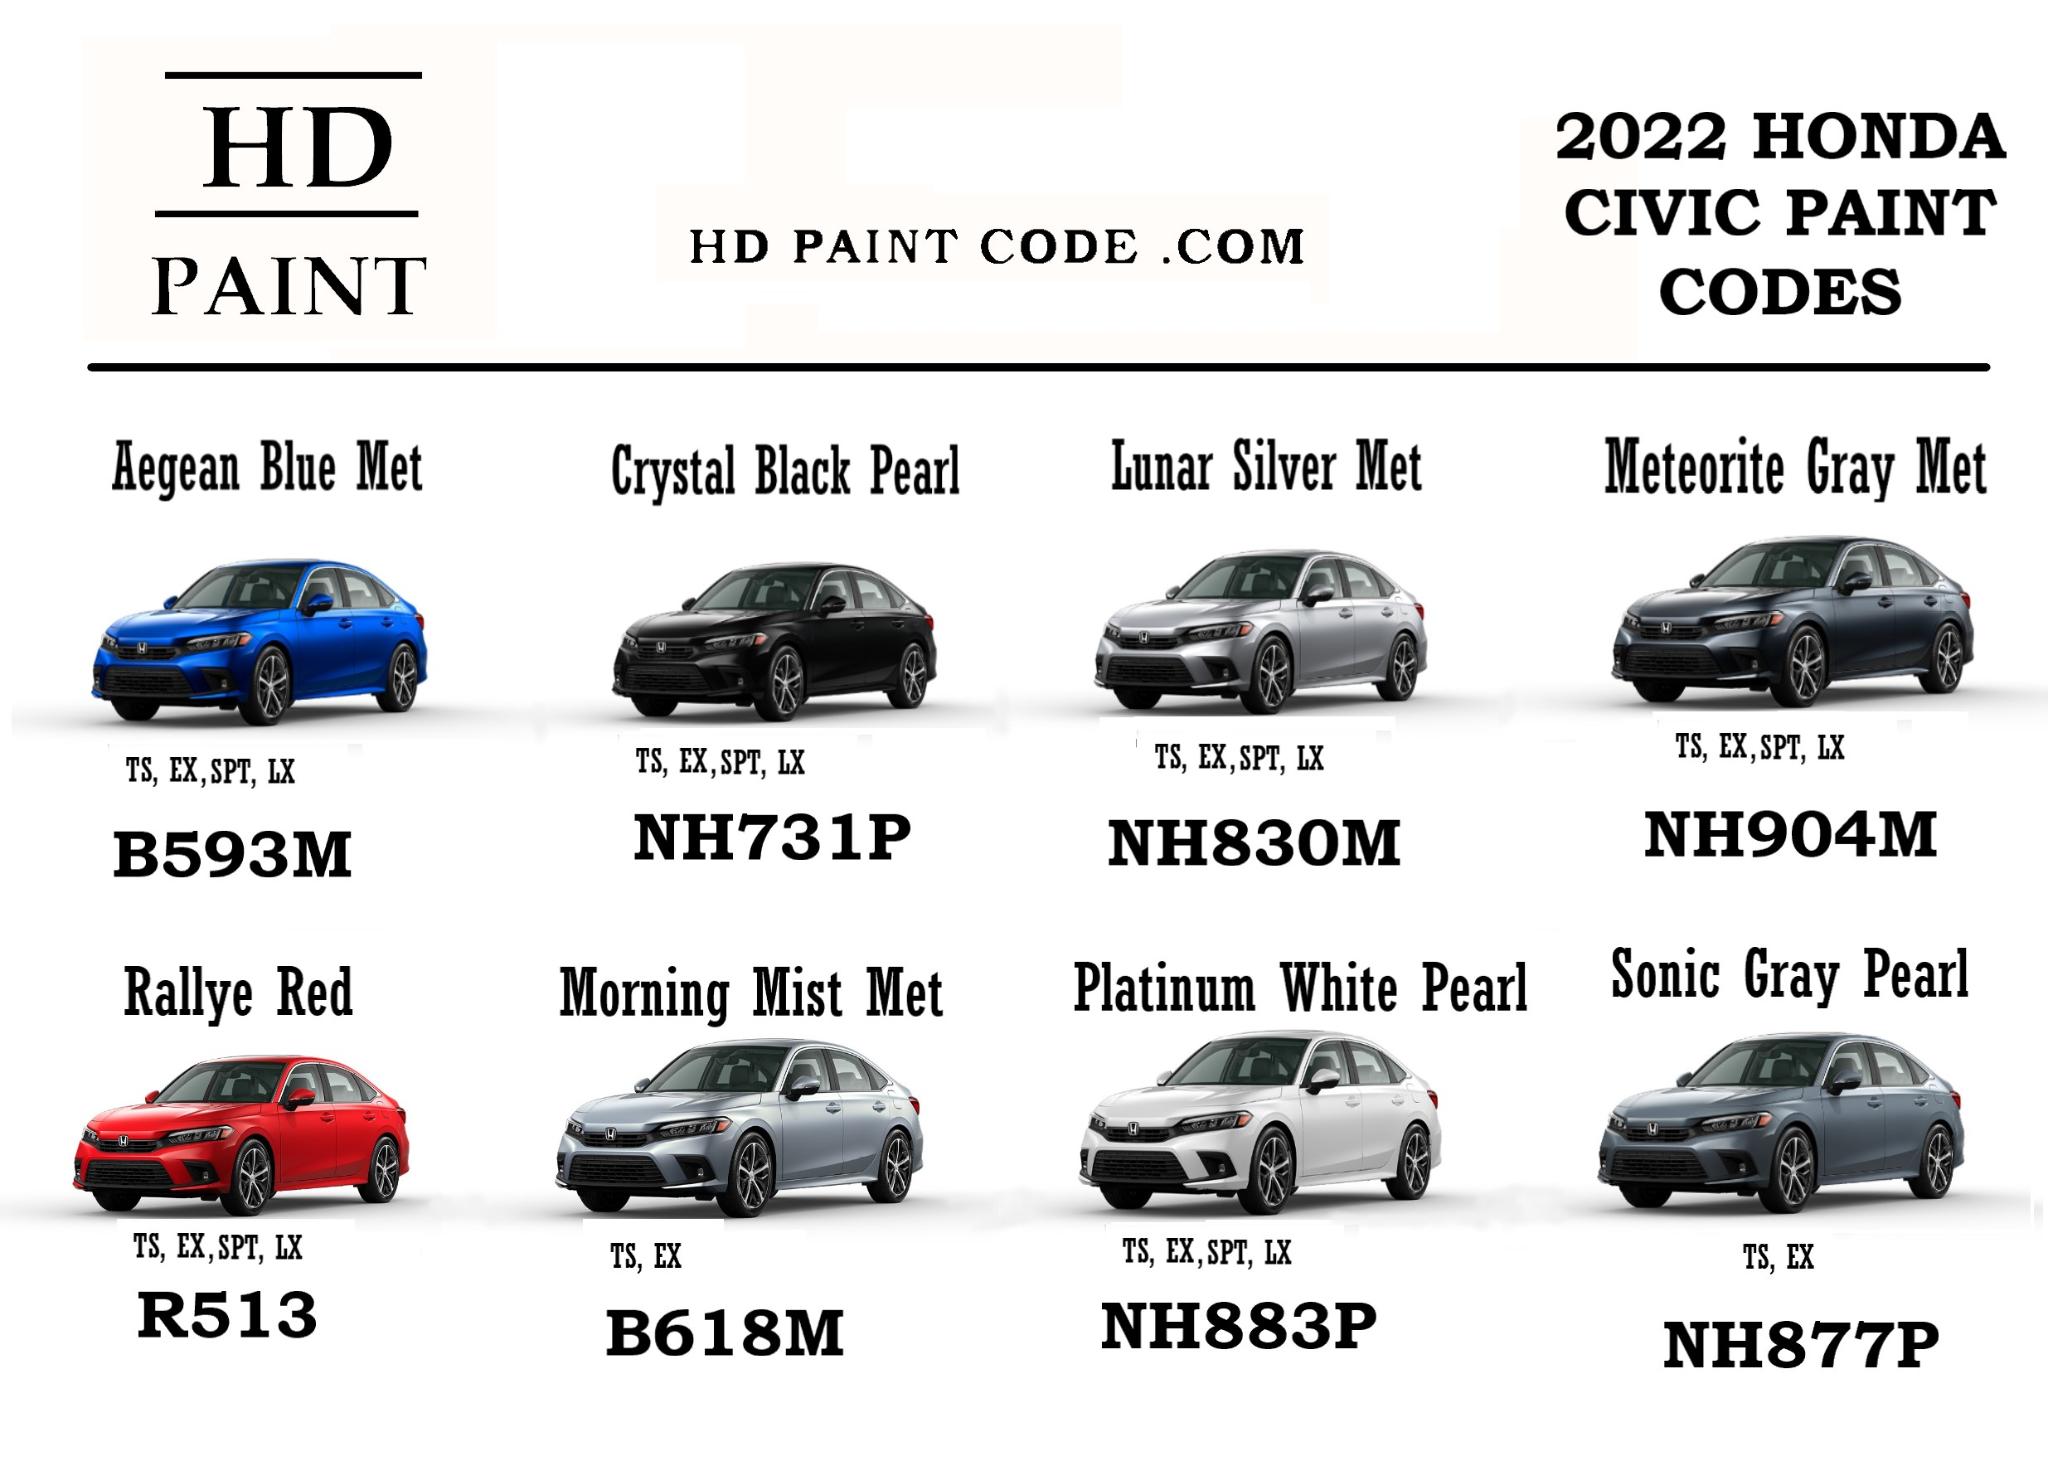 Exterior Colors and Codes used on Honda Civic Models in 2022